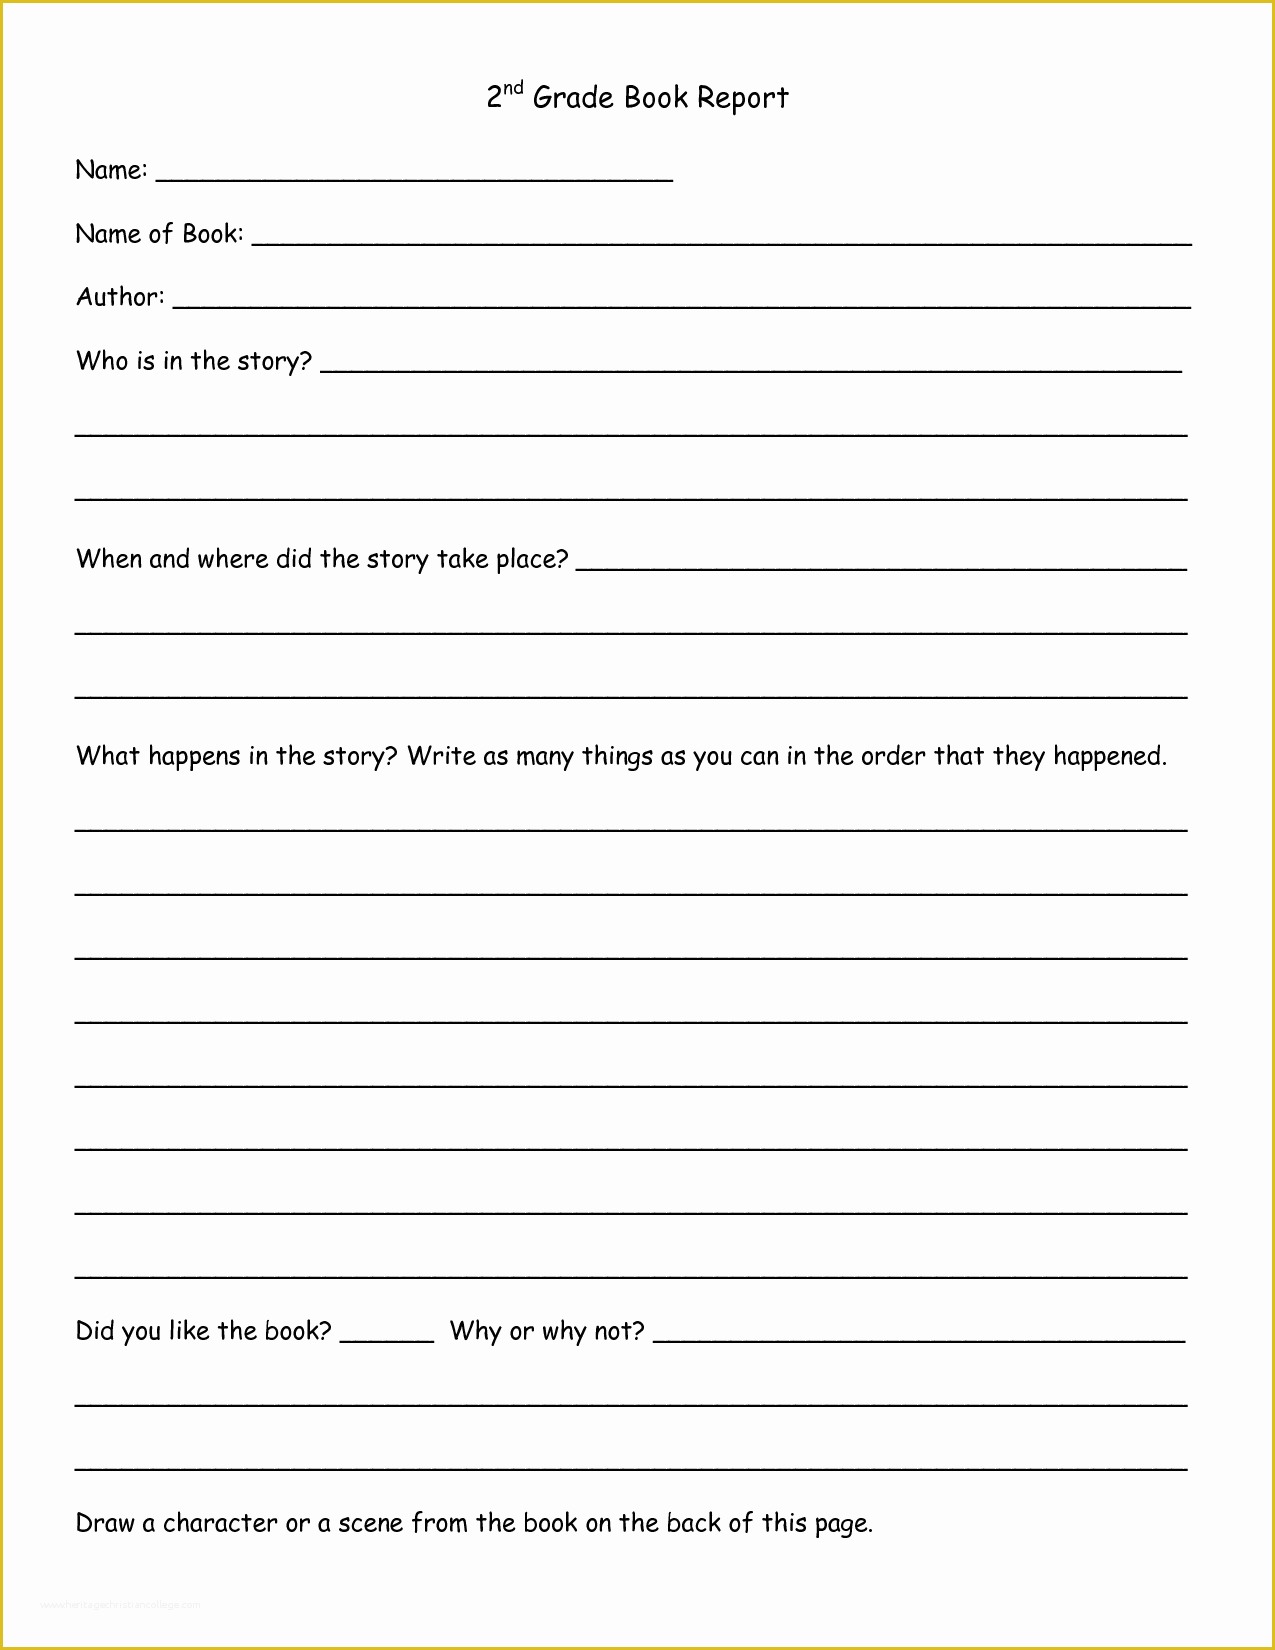 Book Report Template 2nd Grade Free Of 2nd Grade Book Report Template Google Search